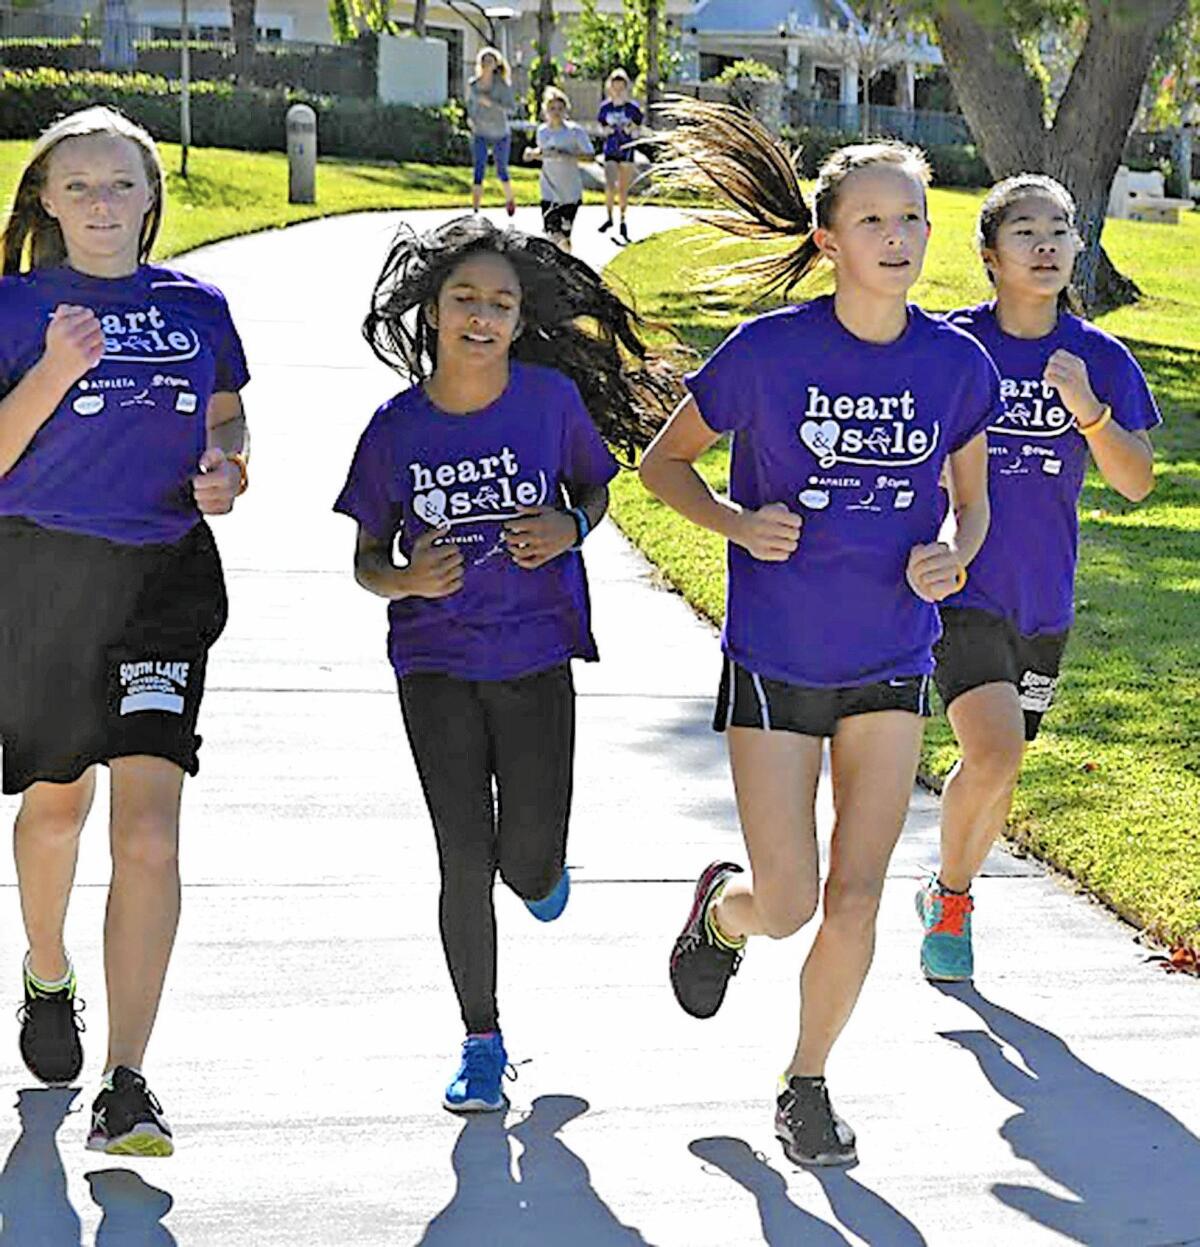 Girls of South Lake Middle School in Irvine run twice a week for Heart & Sole, a program developed by national organization Girls on the Run. The program, introduced to South Lake by the school’s counselor Jessica Hebl, has girls run and discuss lessons connected to the running exercises.